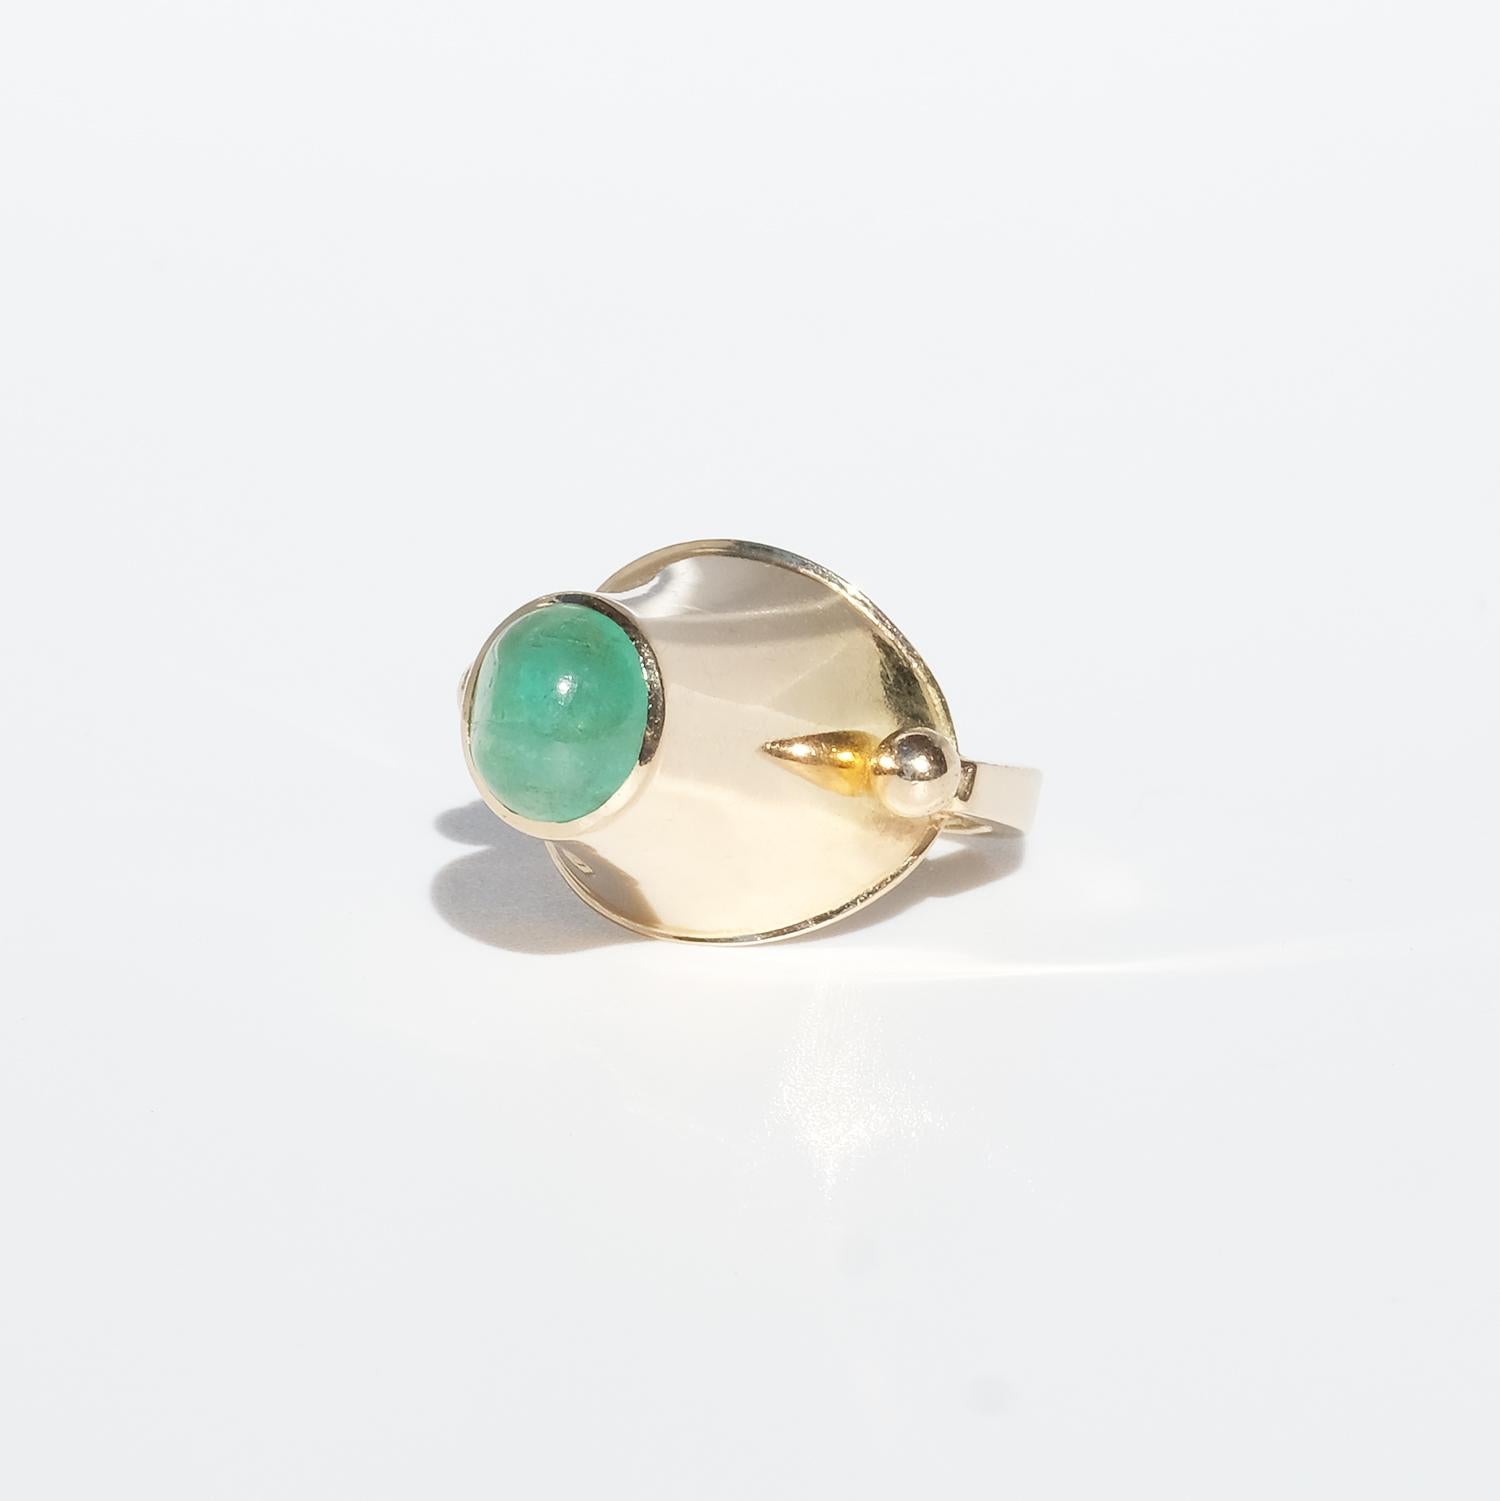 Swedish 18 K Gold Ring with an Emerald Made in 1966, Sigurd Persson 6